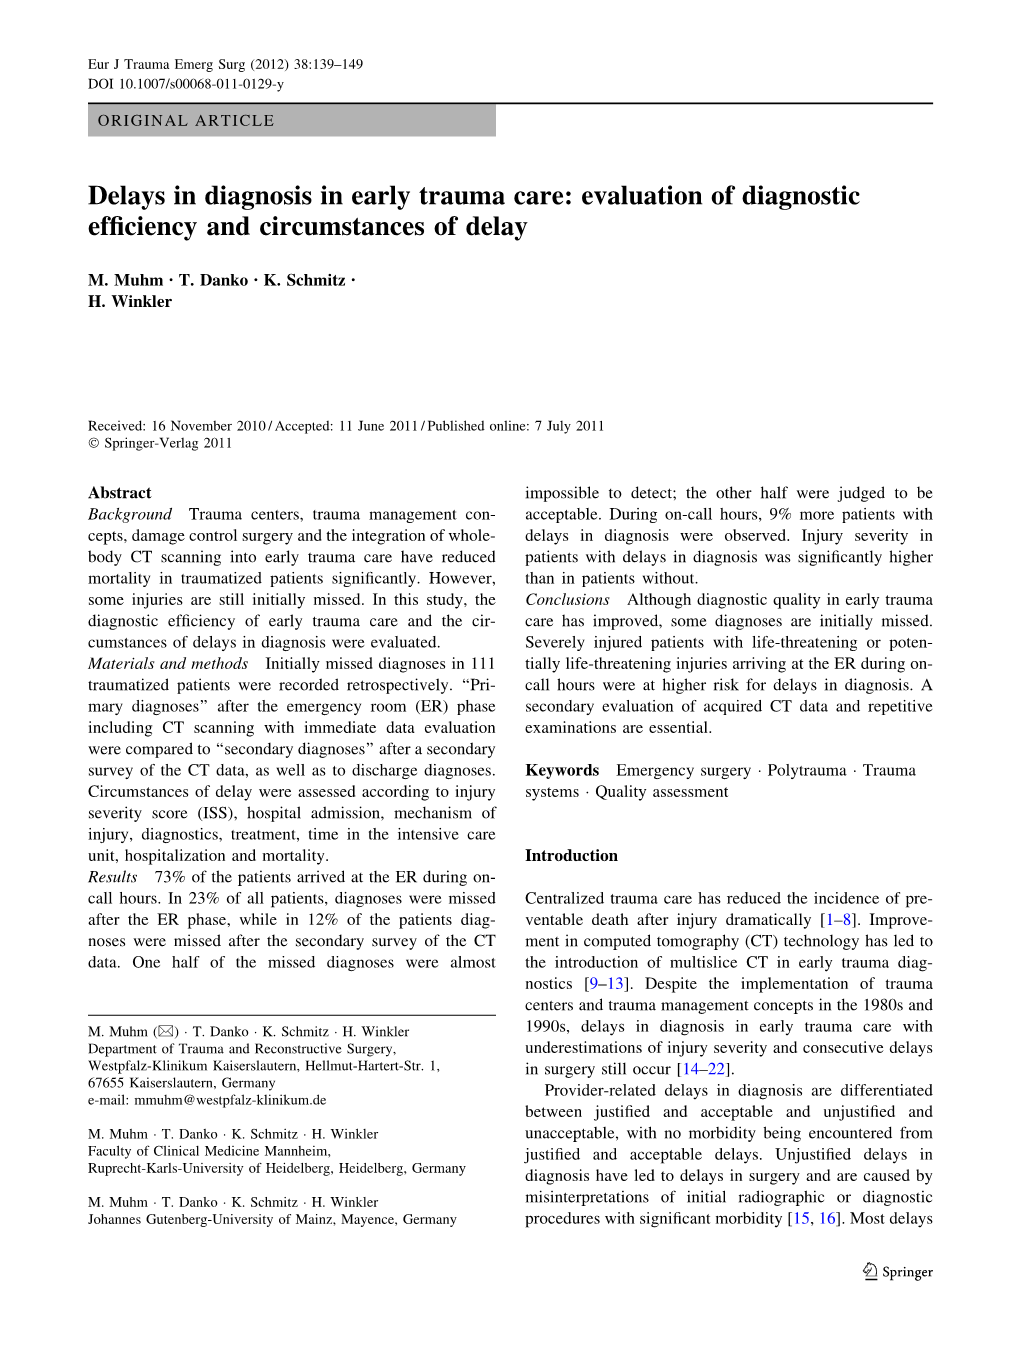 Delays in Diagnosis in Early Trauma Care: Evaluation of Diagnostic Efficiency and Circumstances of Delay